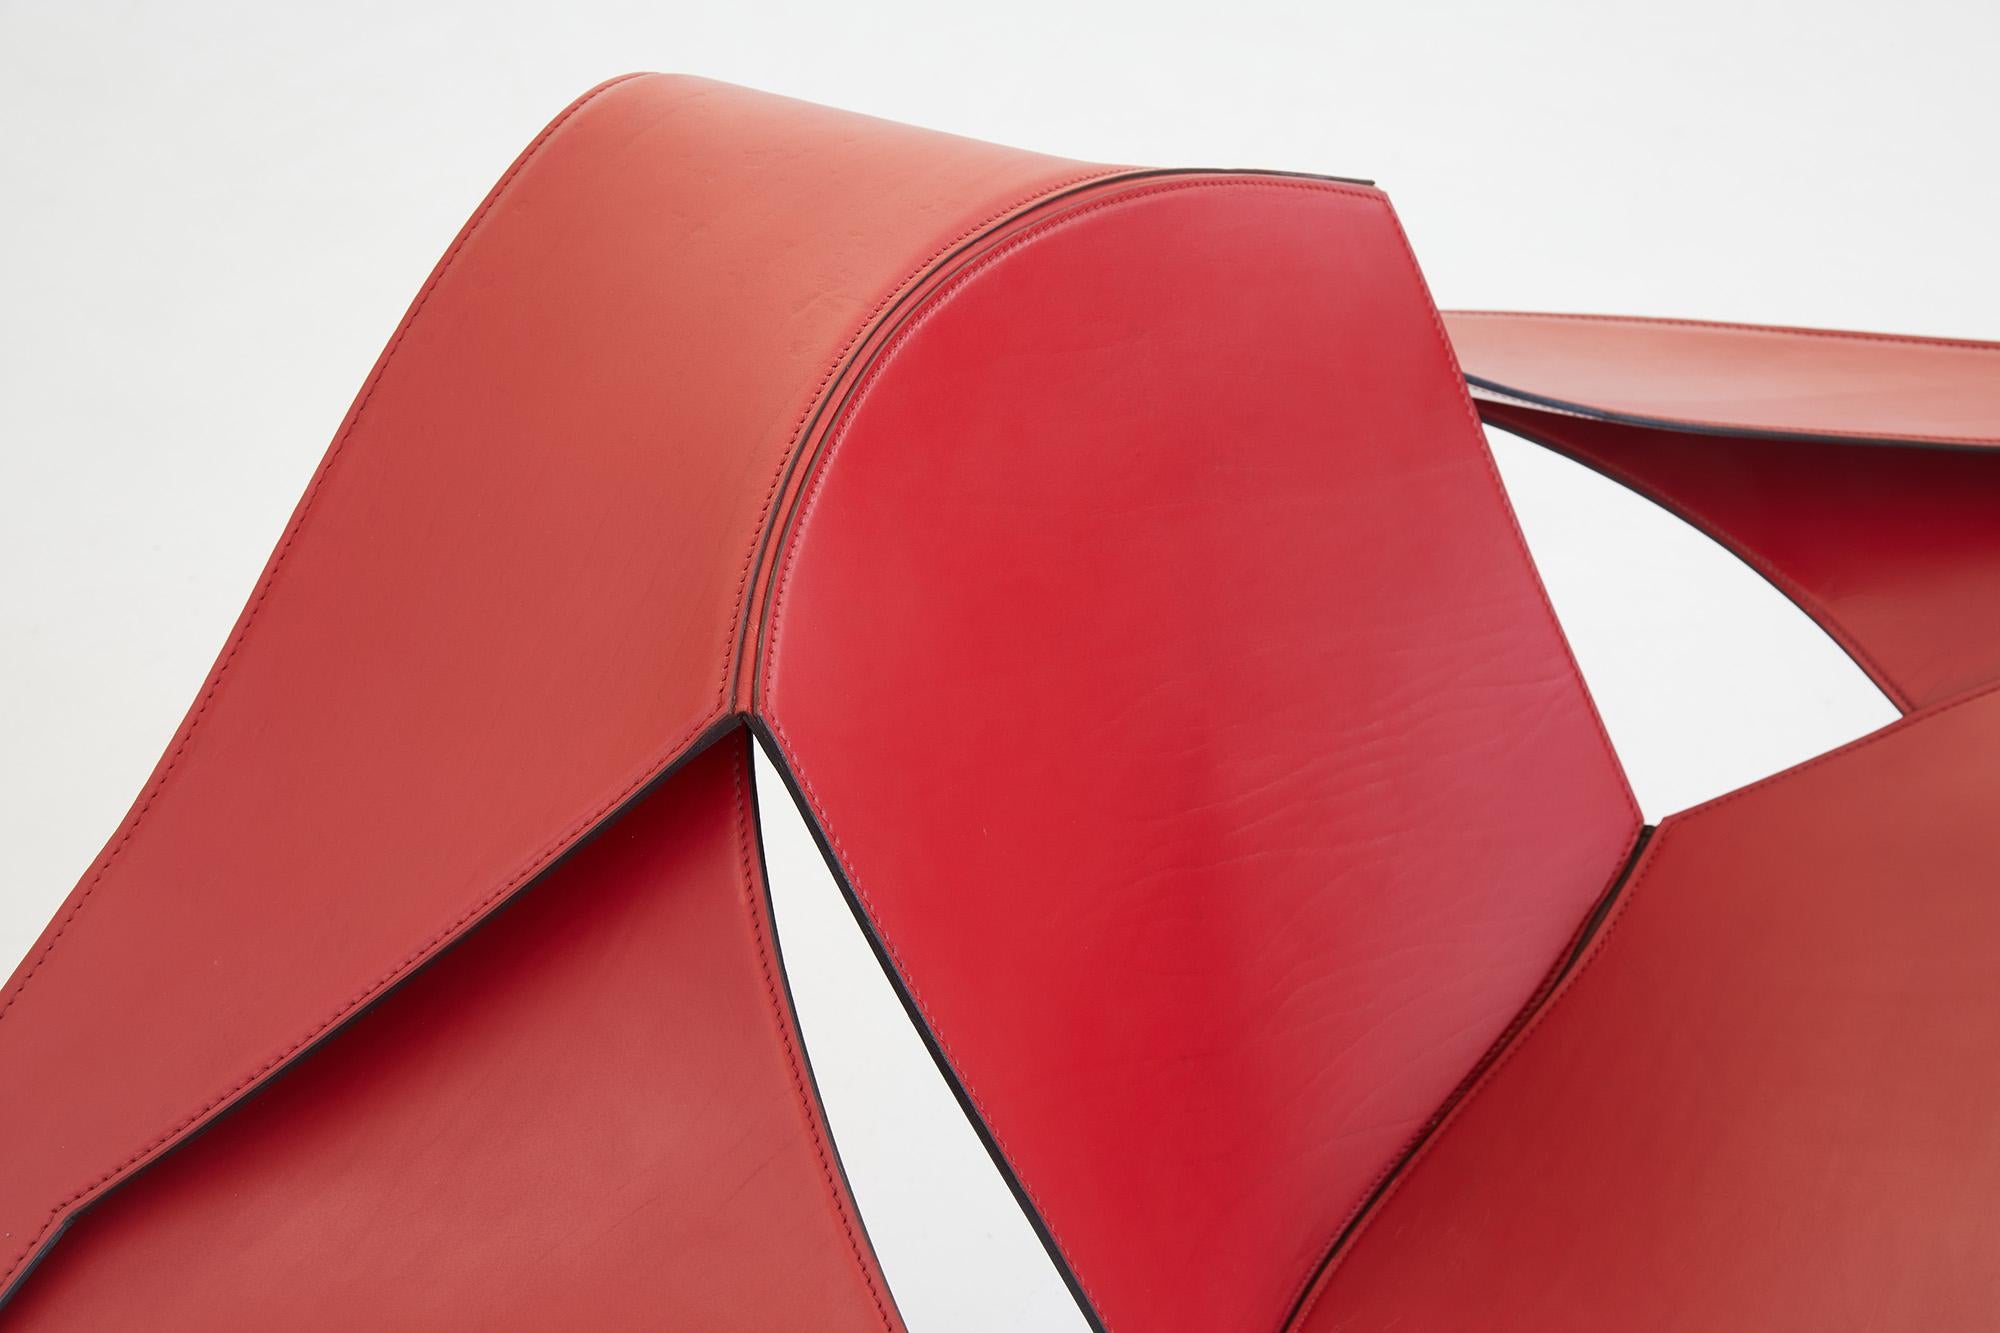 Powder-Coated Matteo Grassi leather lounge chair by Jacques Harold Pollard 1987 For Sale